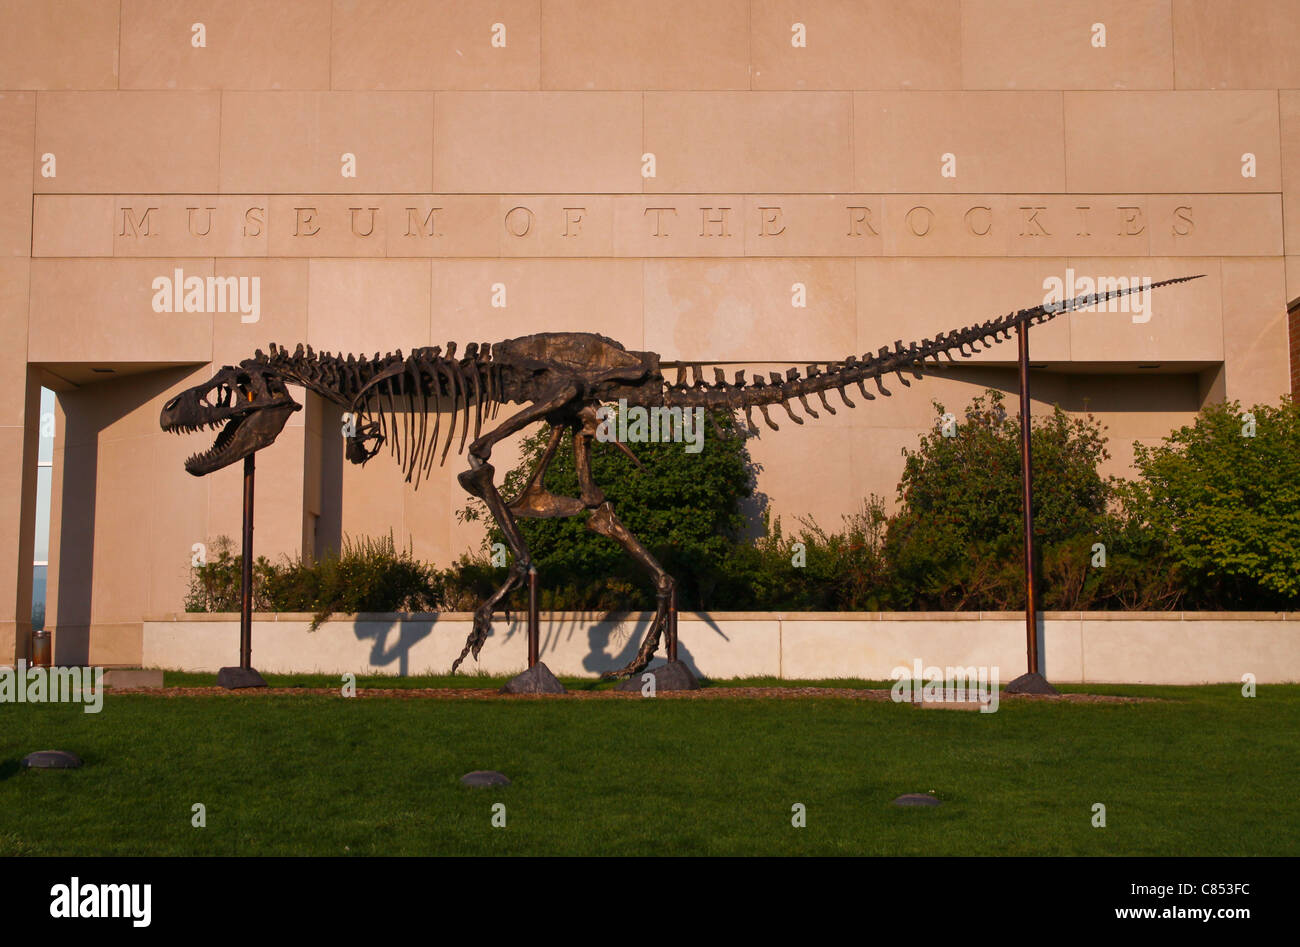 'Big Mike' in front of the Museum of the Rockies in Bozeman, Montana is famous for its dinosaur fossils and natural history. Stock Photo